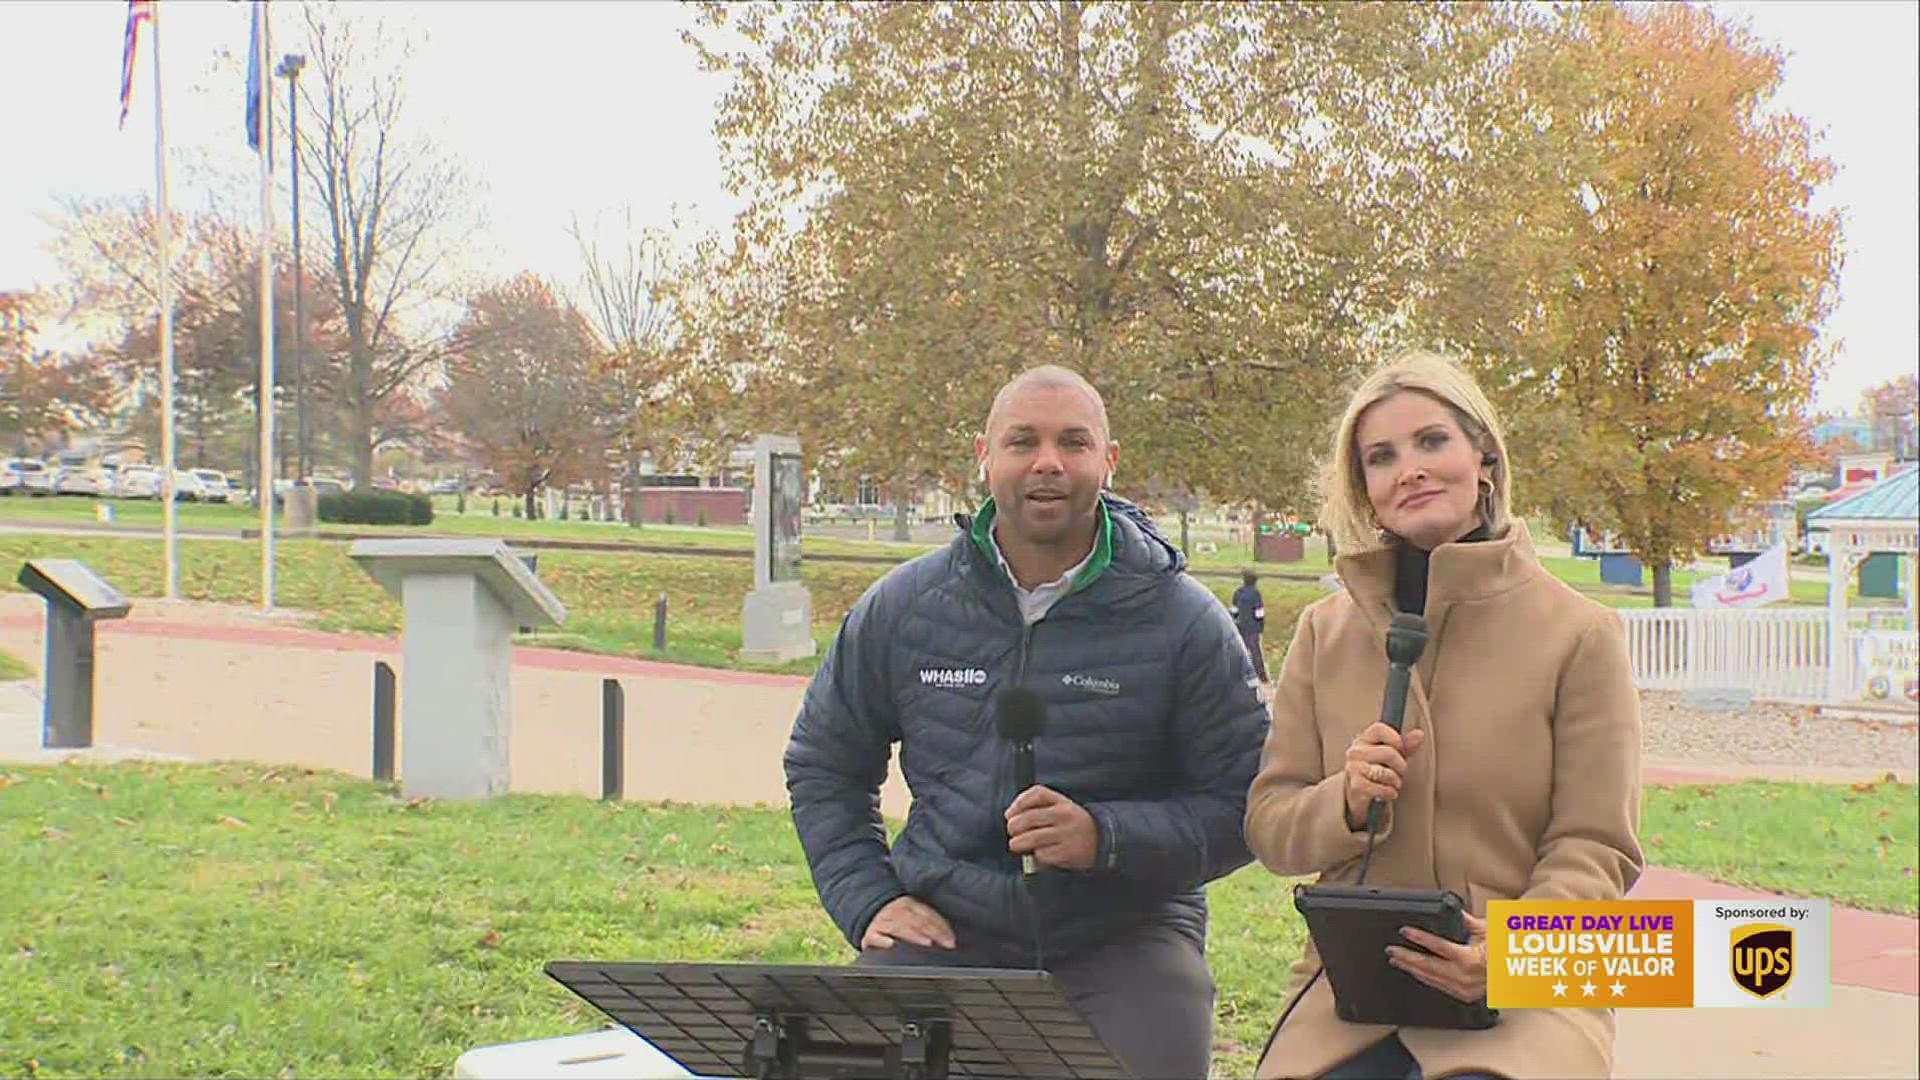 Eric King and Claudia Coffey host a special edition of Great Day Live, celebrating Veterans Day at Veteran's Memorial Park of Kentucky